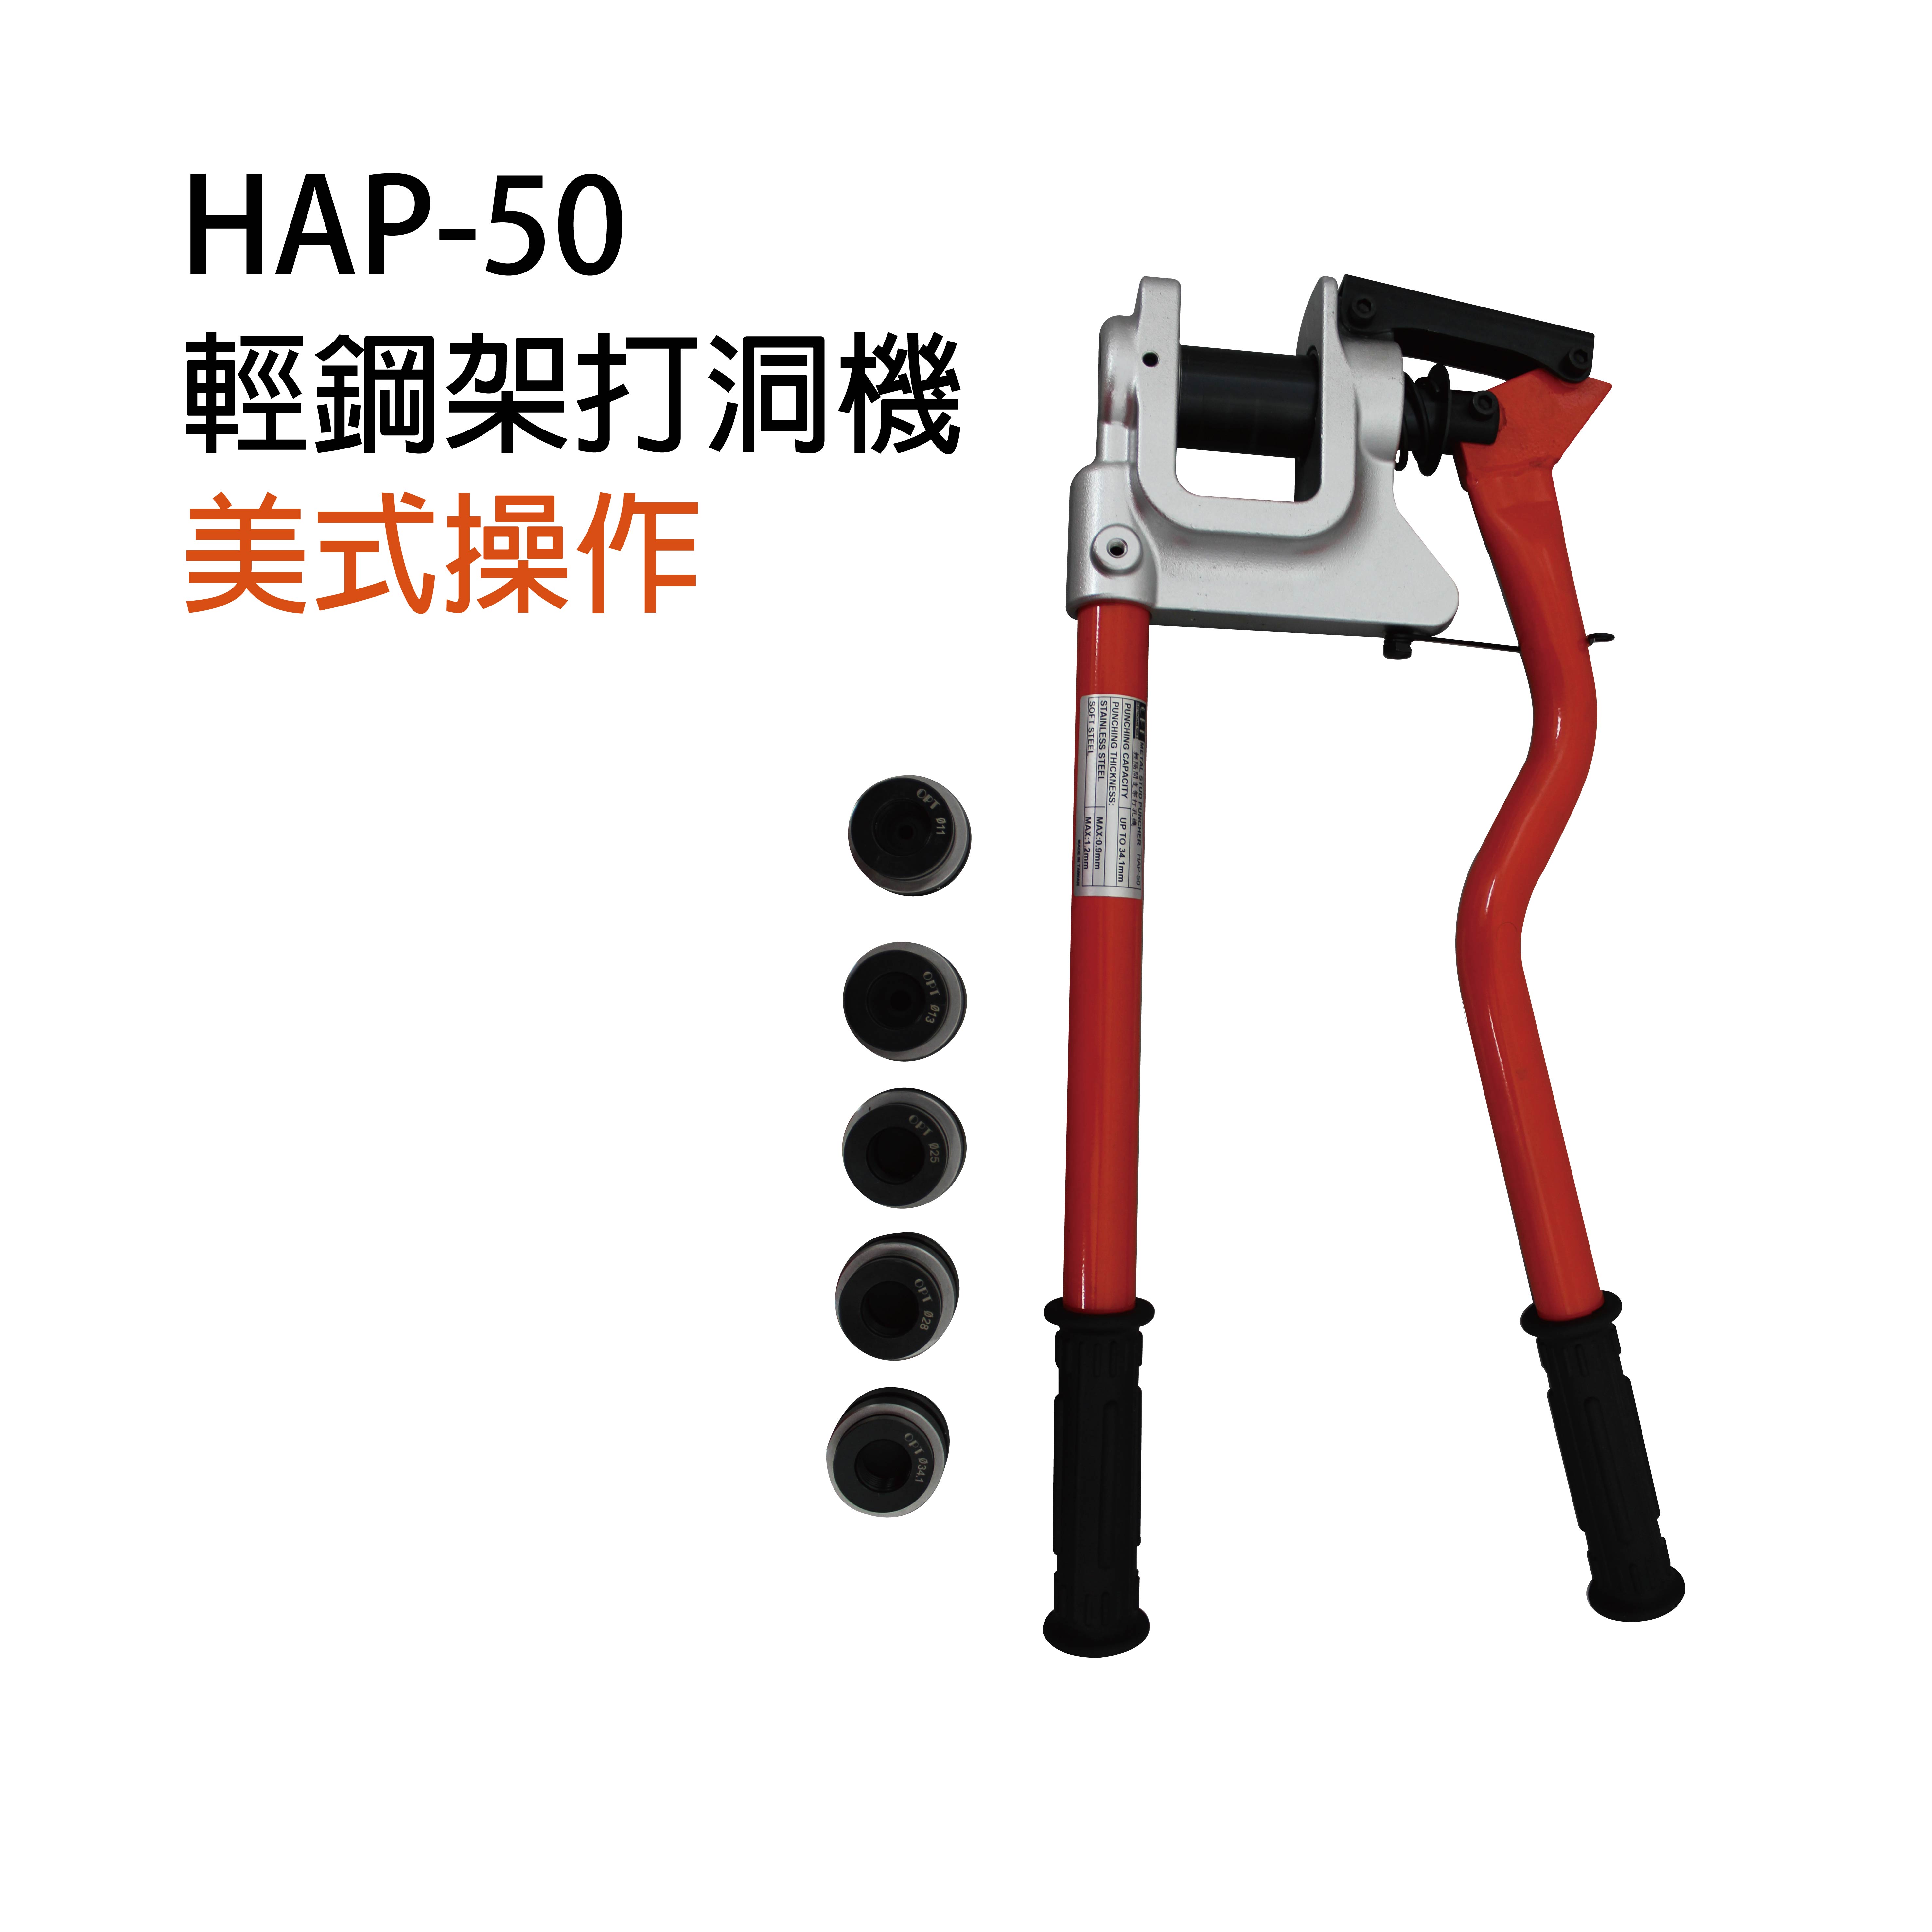 HAP-50 MANUAL PUNCHER FOR T-BARS AND LIGHT FRAMES-HAP-50